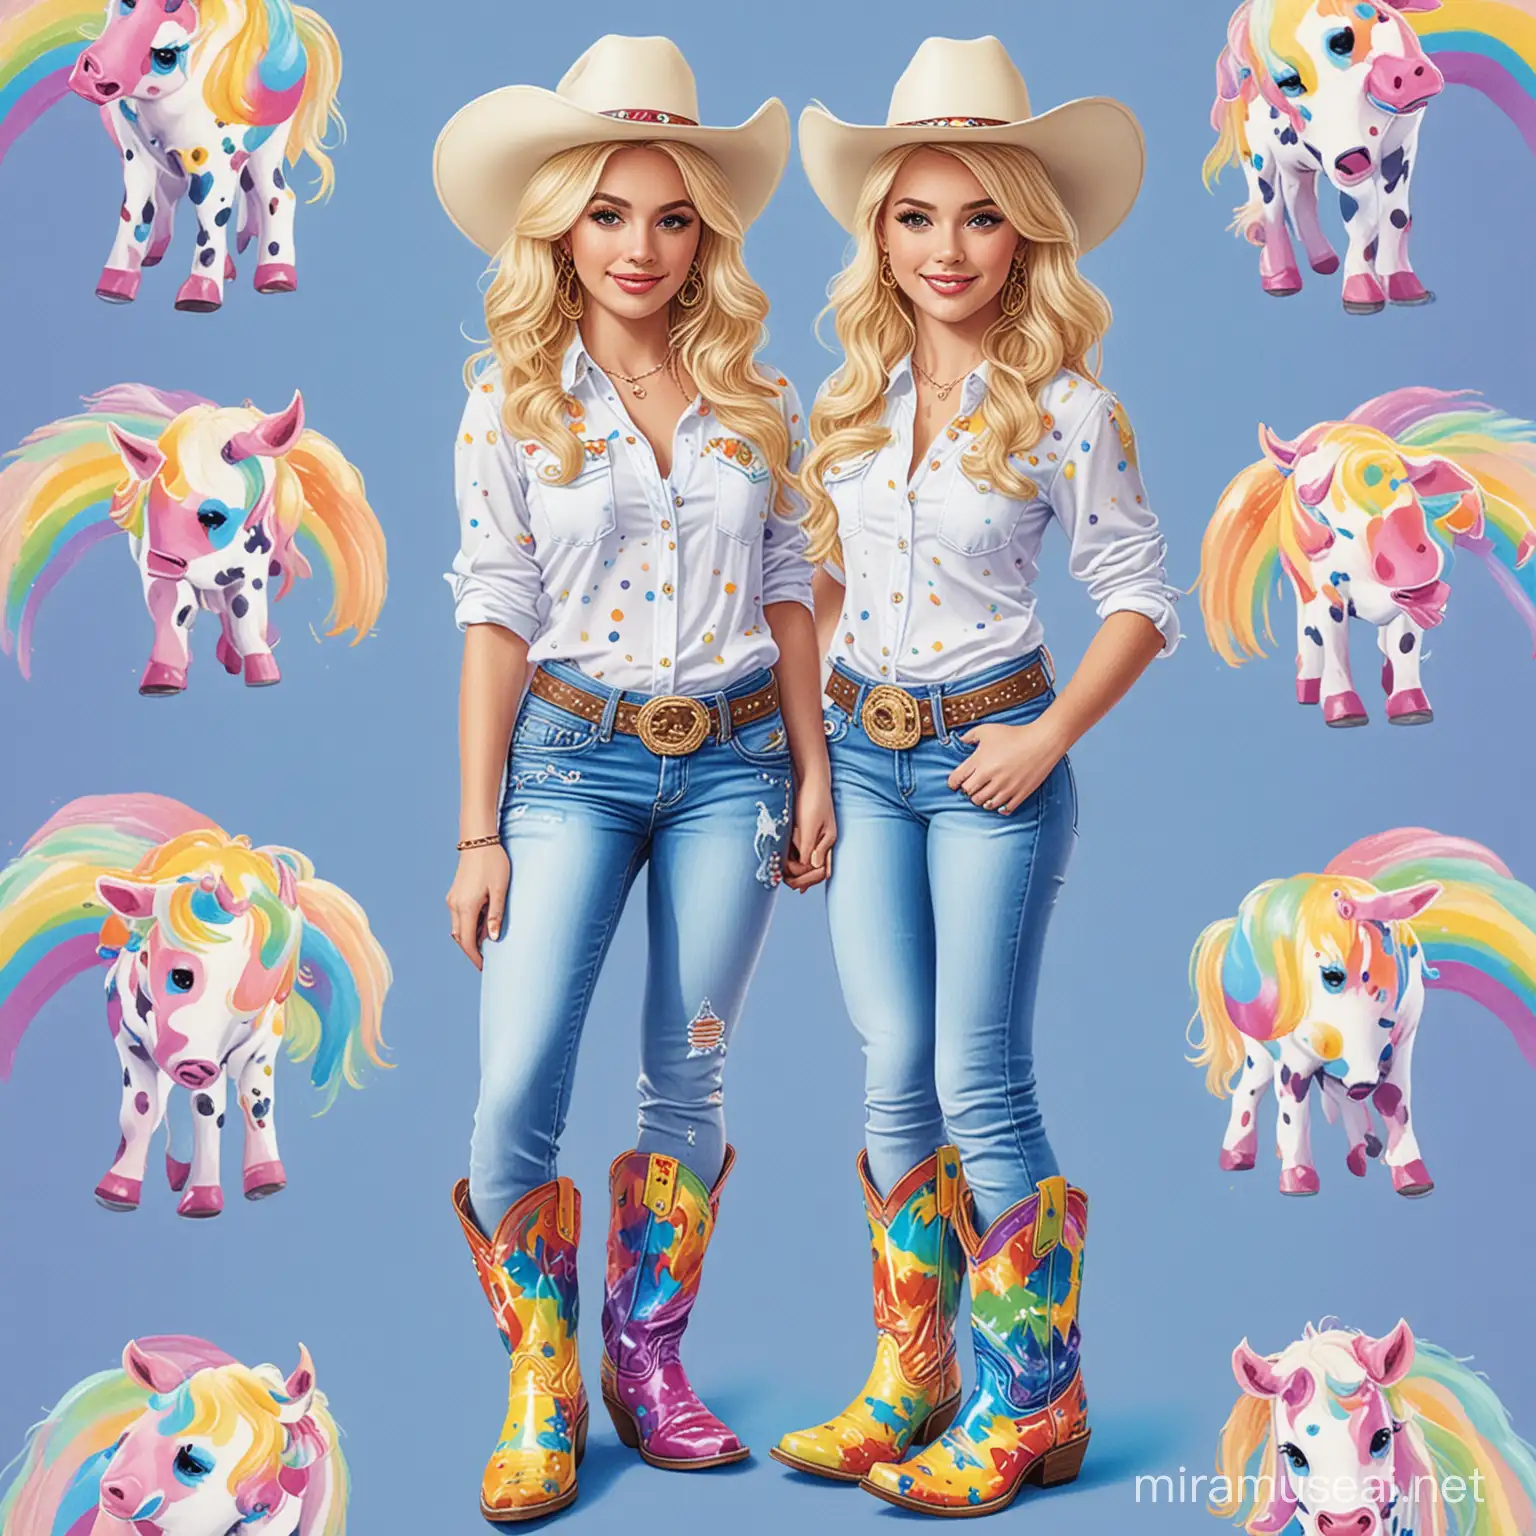 LISA FRANK INSPIRED CARTOON ILLUSTRATION OF A BLONDE GIRL, WEARING A BLUE AND COW PRINT COWBOY HAT , SHE IS WEARING A WHITE SHIRT AND JEANS WITH RAINBOW COWBOY BOOTS IN THE ART OF LISA FRANK